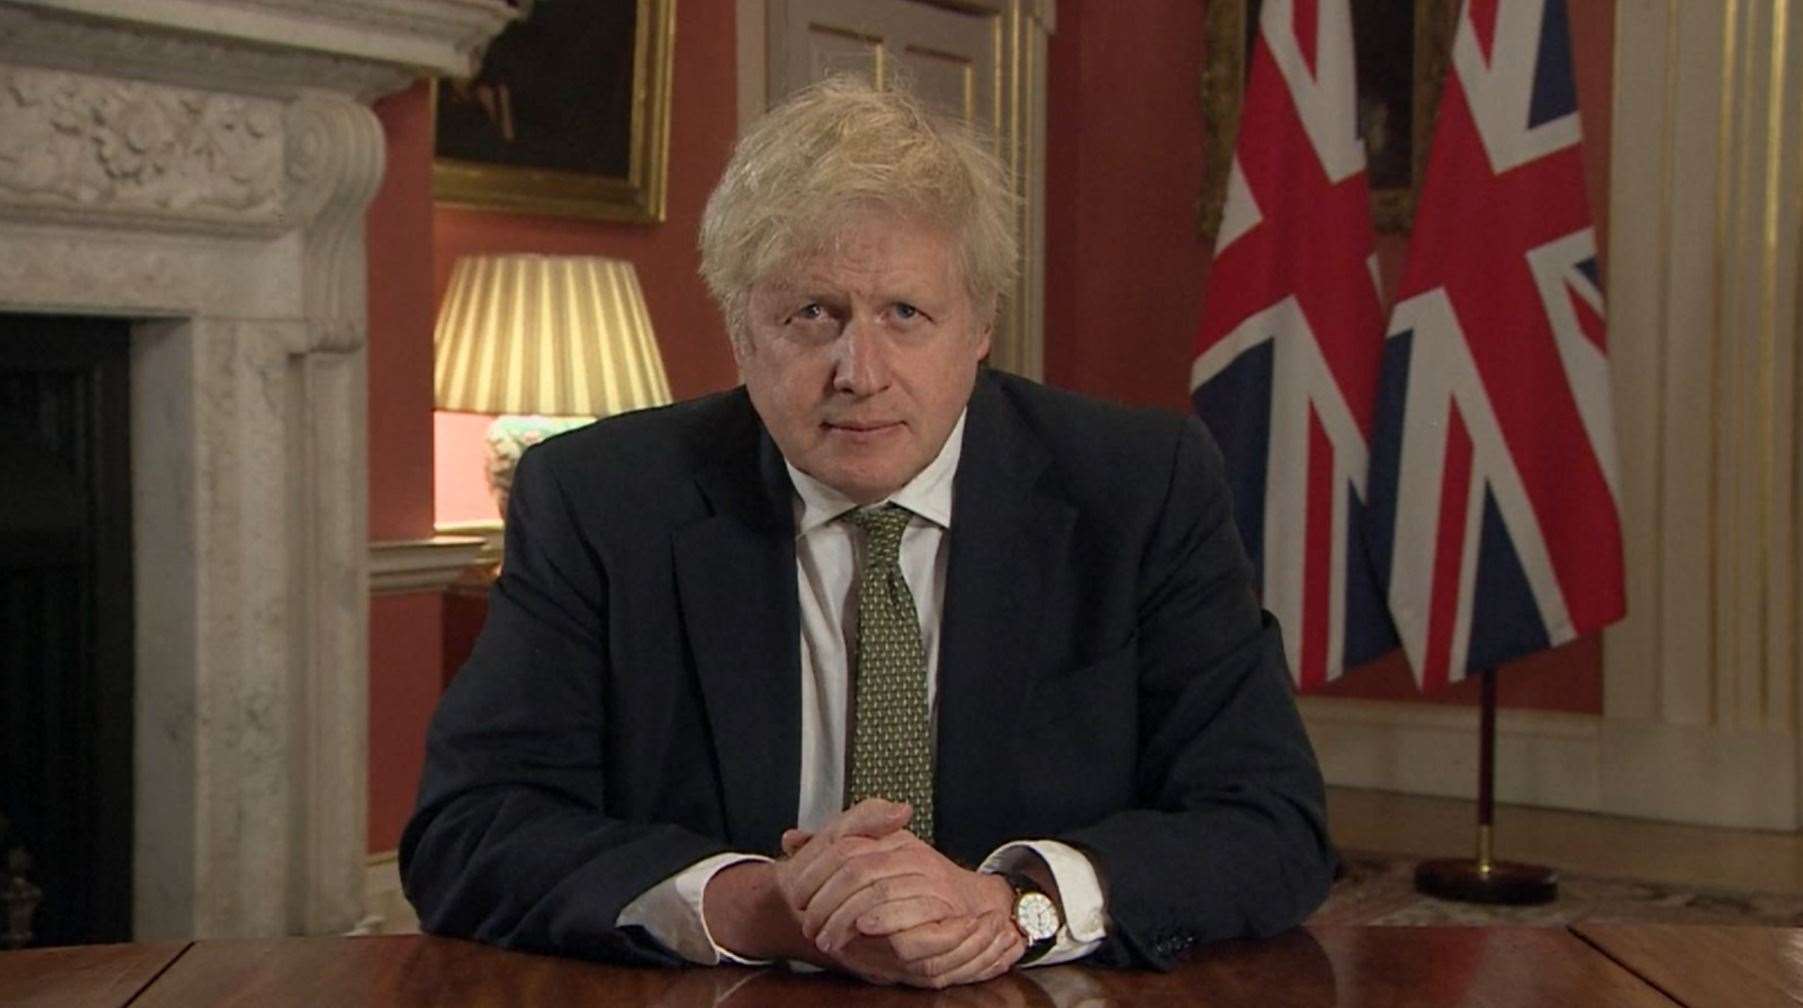 Prime Minister Boris Johnson announced a third national lockdown on Monday night, as cases surged across the country after Christmas